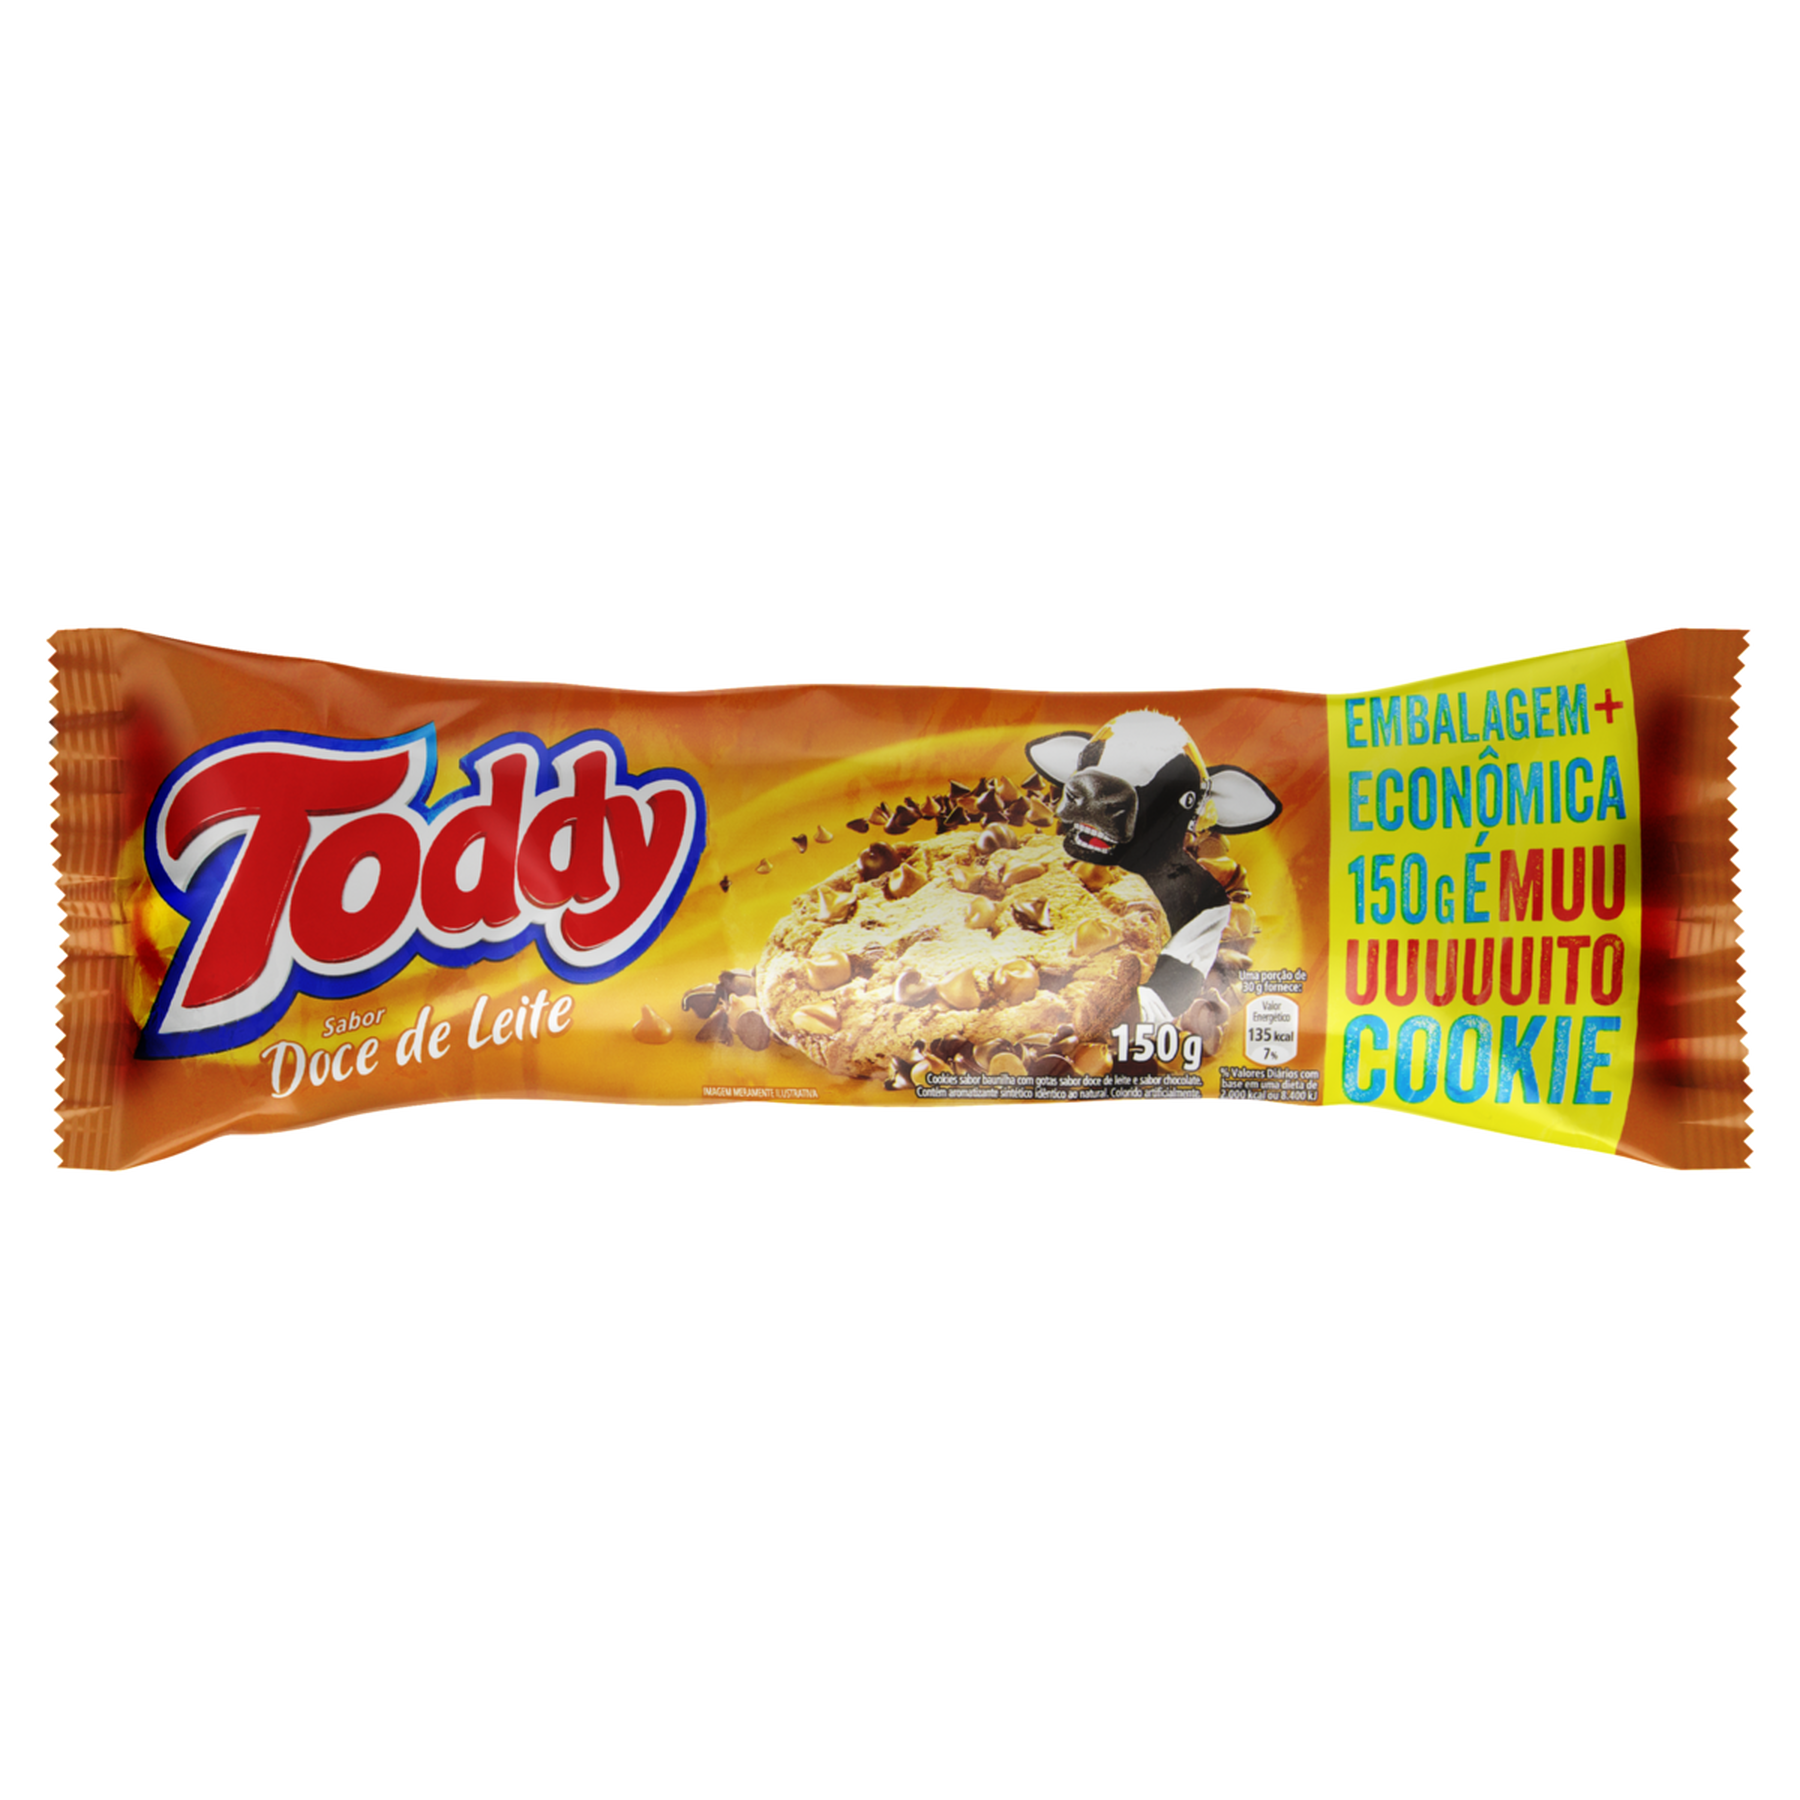 Biscoito Cookie Doce de Leite Toddy Pacote 150g Embalagem Econômica